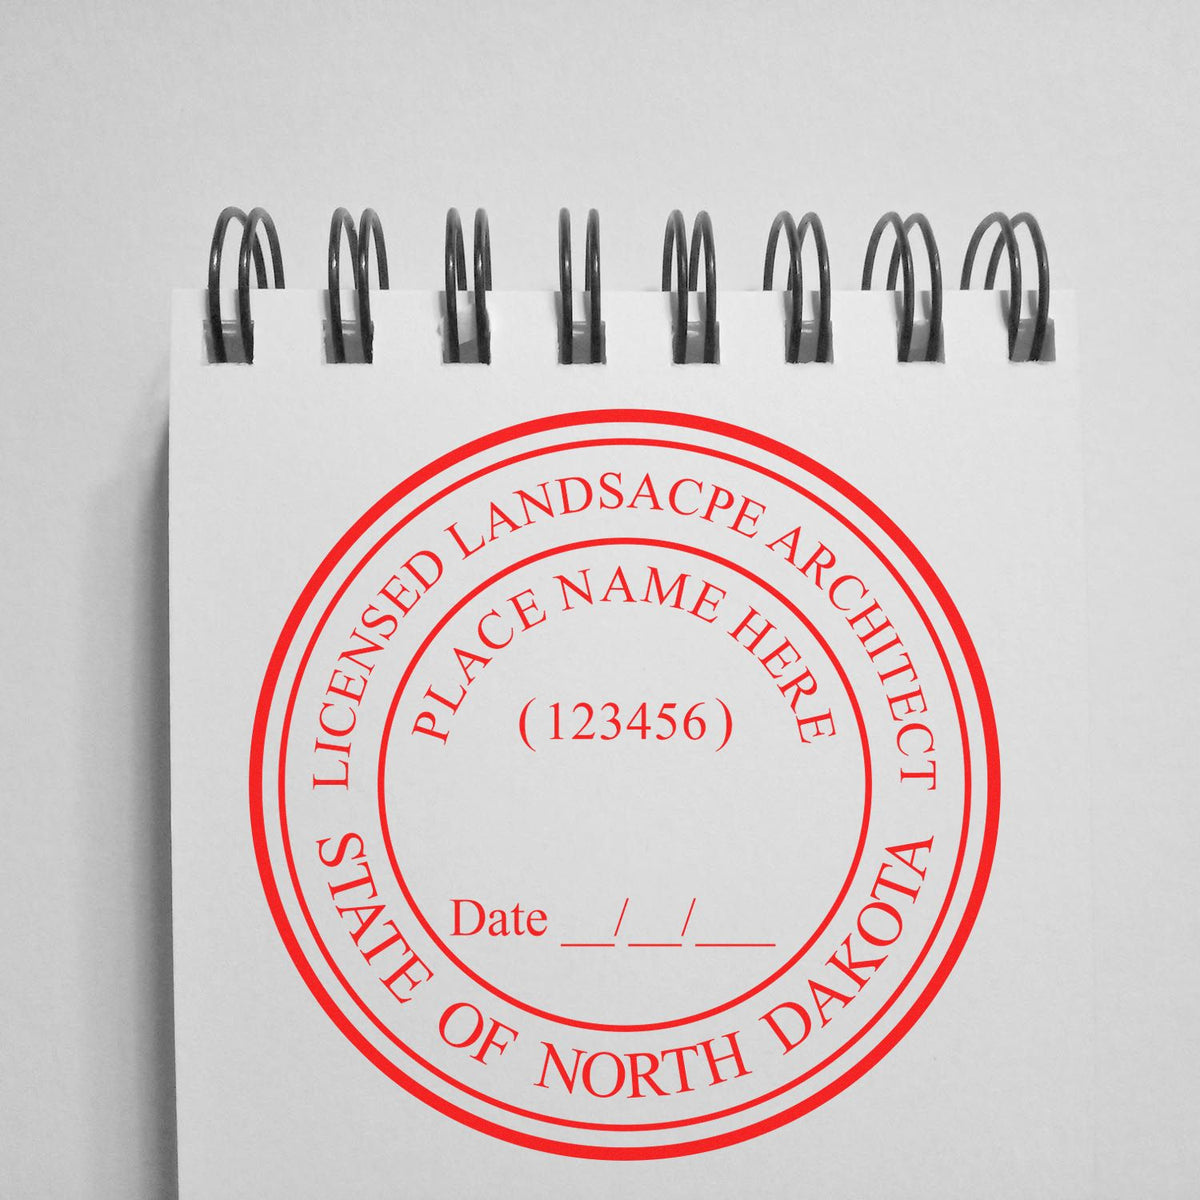 A photograph of the Digital North Dakota Landscape Architect Stamp stamp impression reveals a vivid, professional image of the on paper.